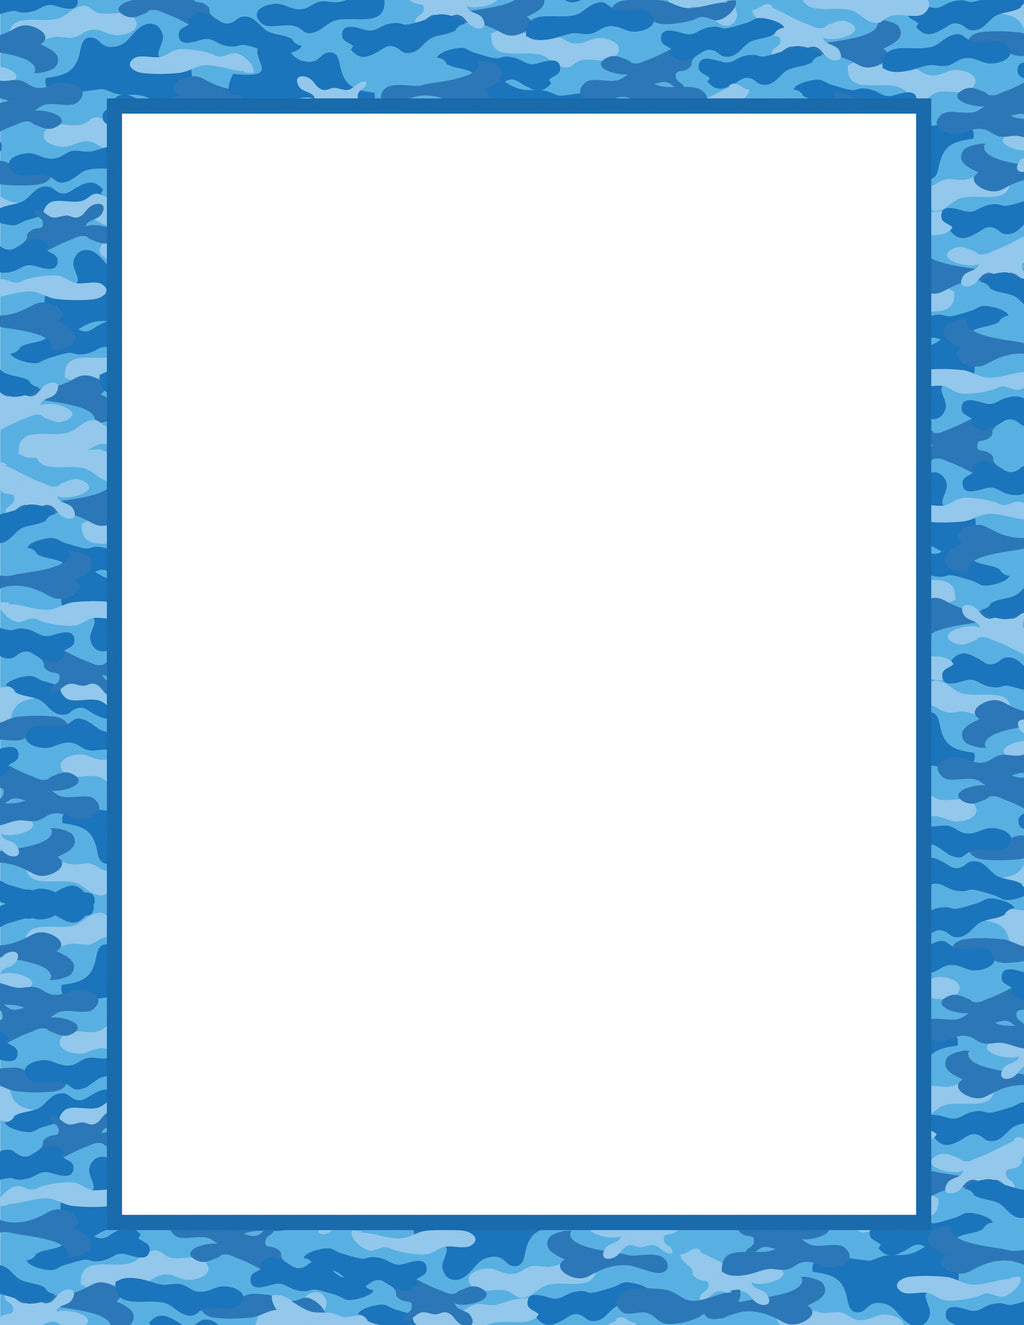 Designer Paper - Water Camo (50 Sheet Package) - Creative Shapes Etc.